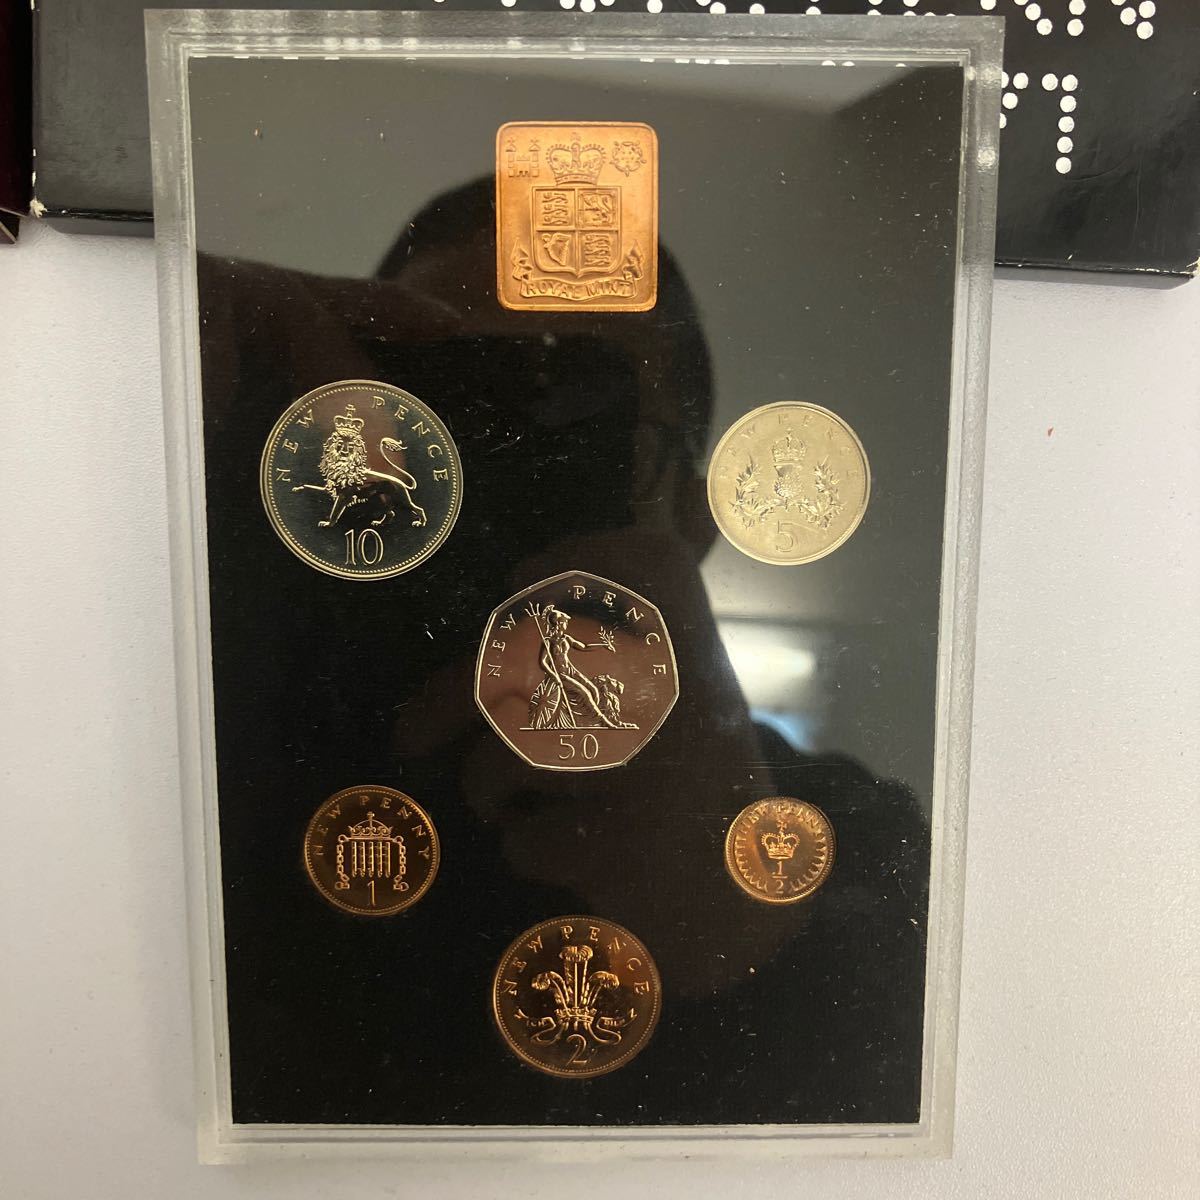 【E/D11602】★1円スタート 海外コイン ミントセット COINAGE OF GREAT BRITAIN 1970/1971 イギリス貨幣セット_画像6